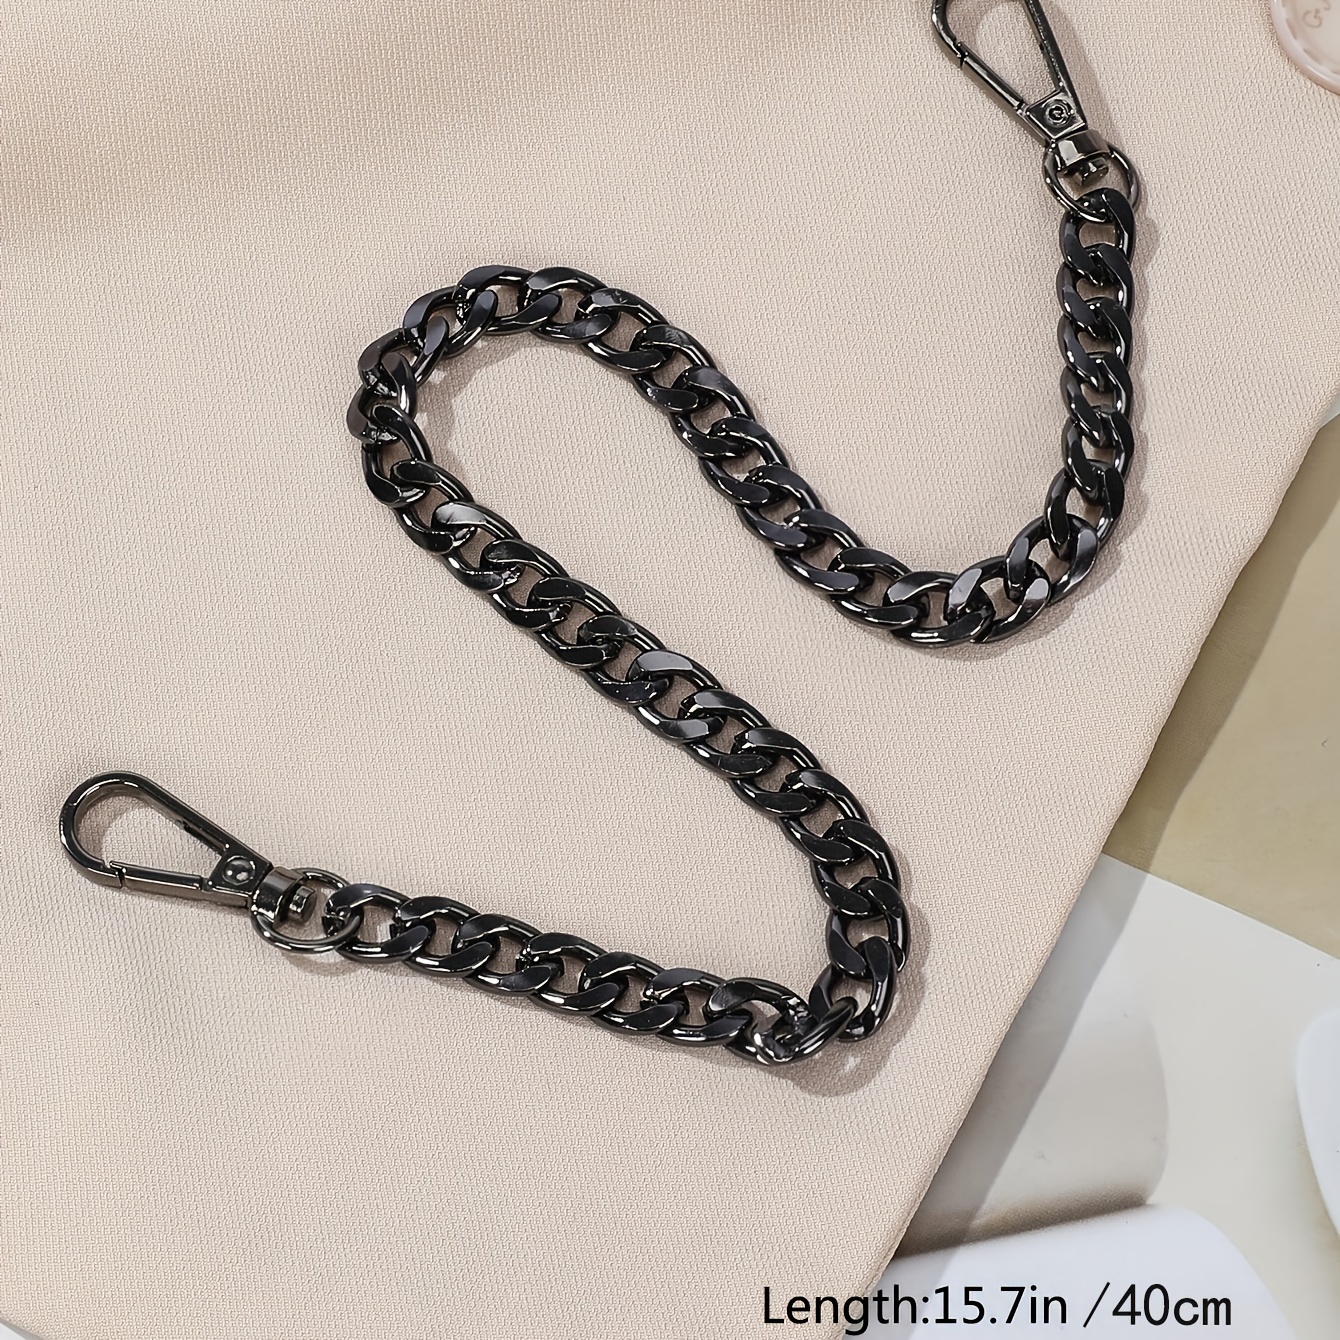 Metal Bag Chain Wallet Chain Replacement Bag Strap Ladies Shoulder Bag Messenger Bag Chain Strap Wallet Accessories for LV Length 47 Inches,Temu